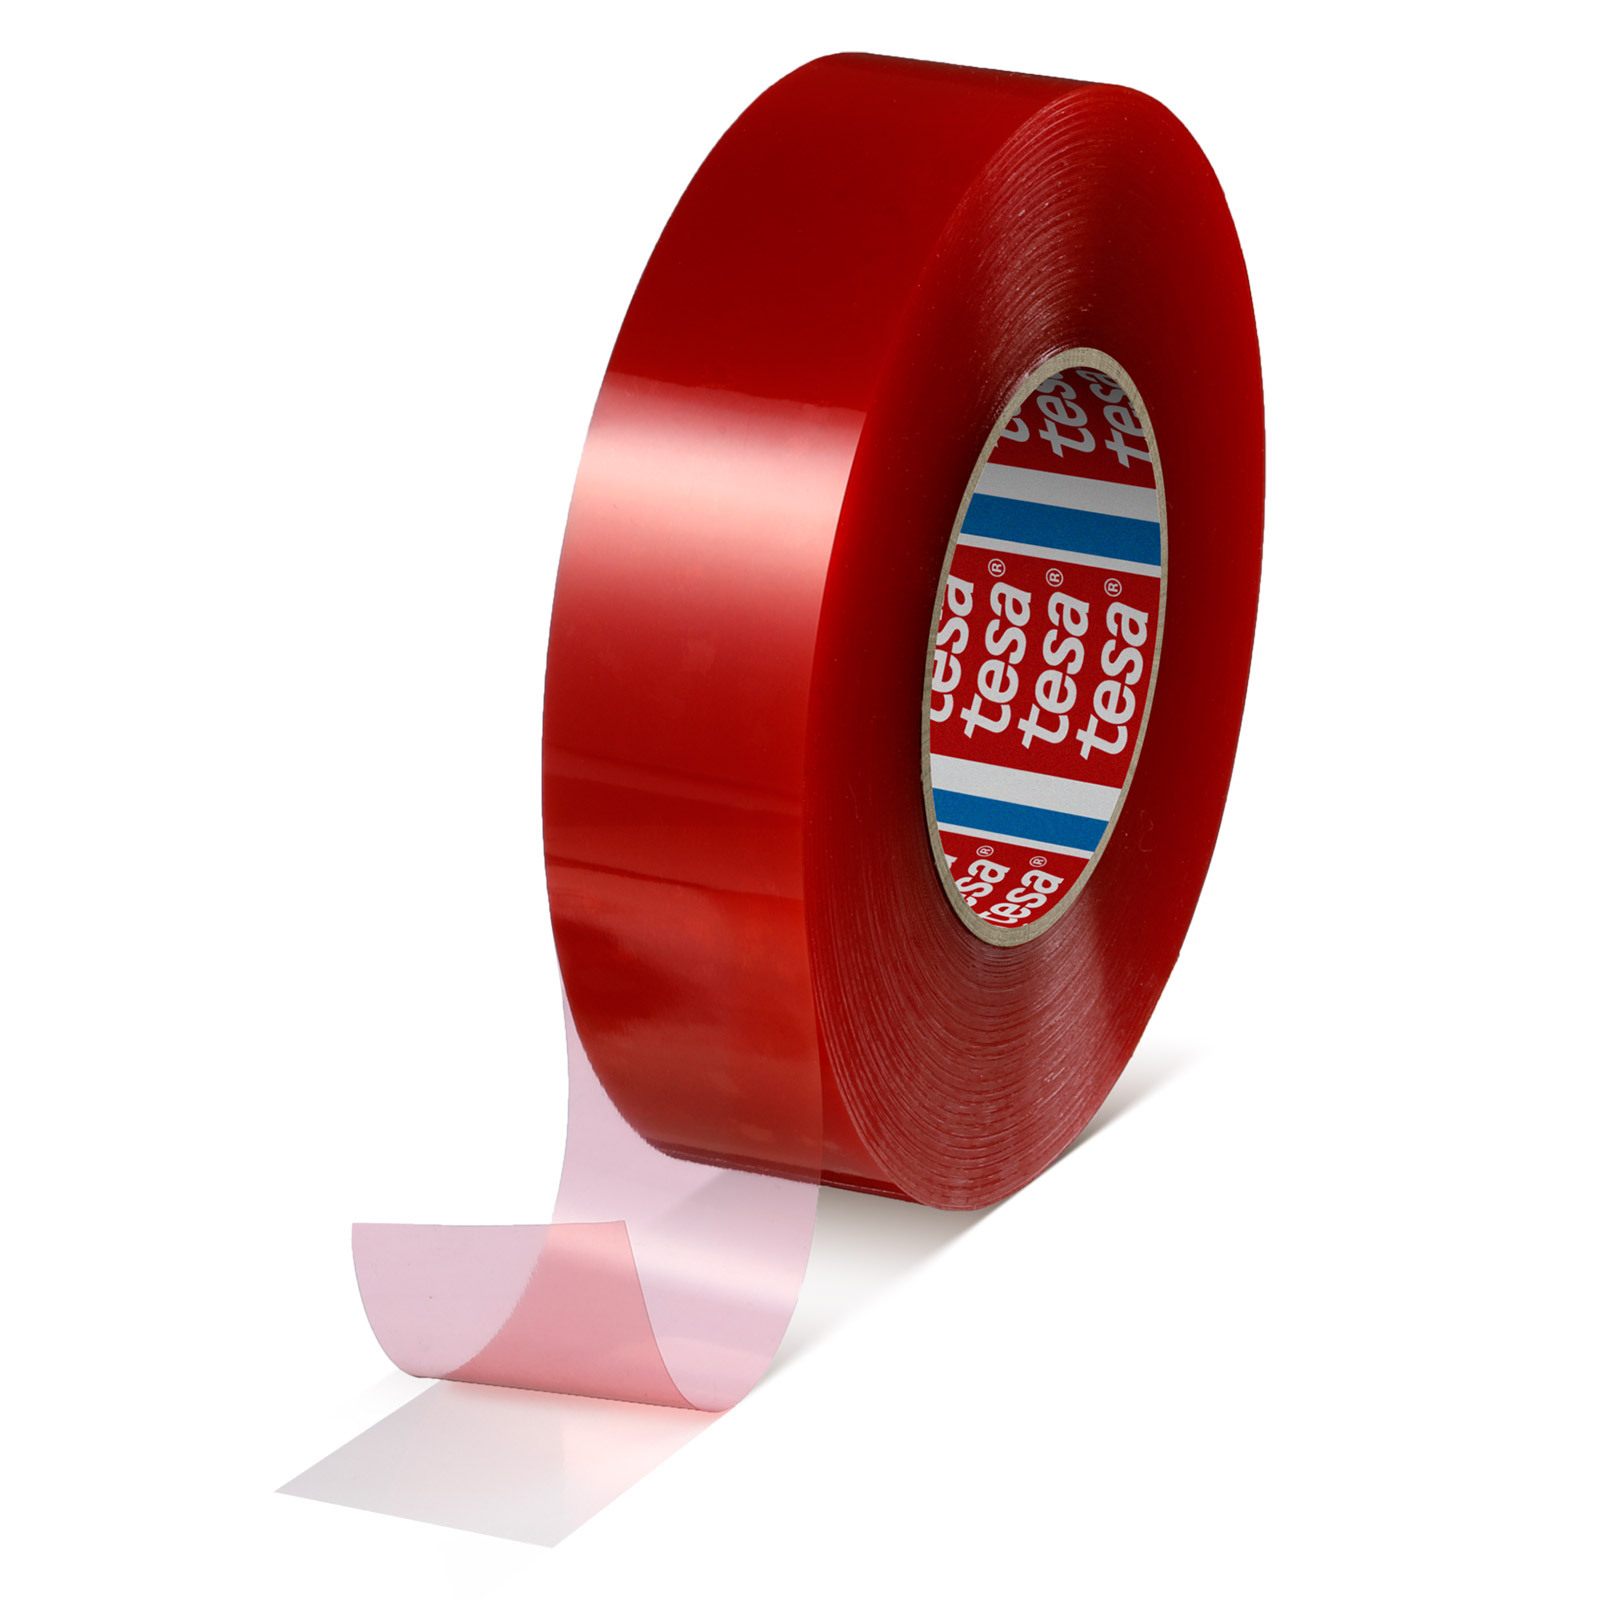 Double-Sided, Transparent, Film Tape - 45K174